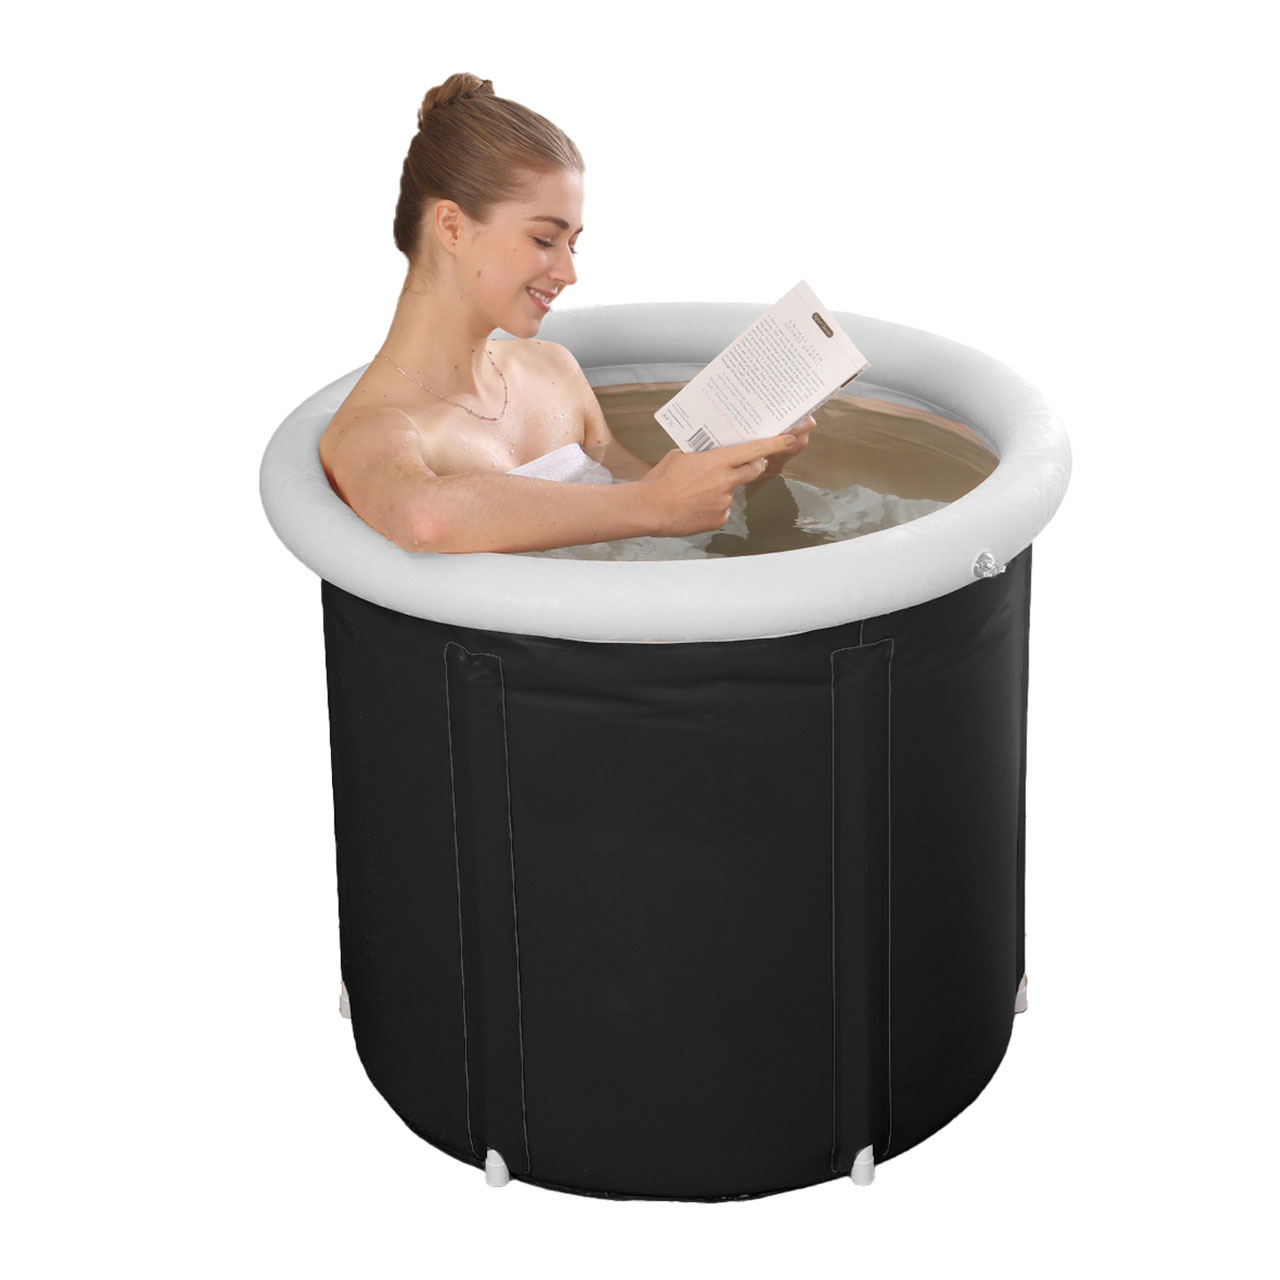 How to Use Ice Bath for Post-Exercise Recovery